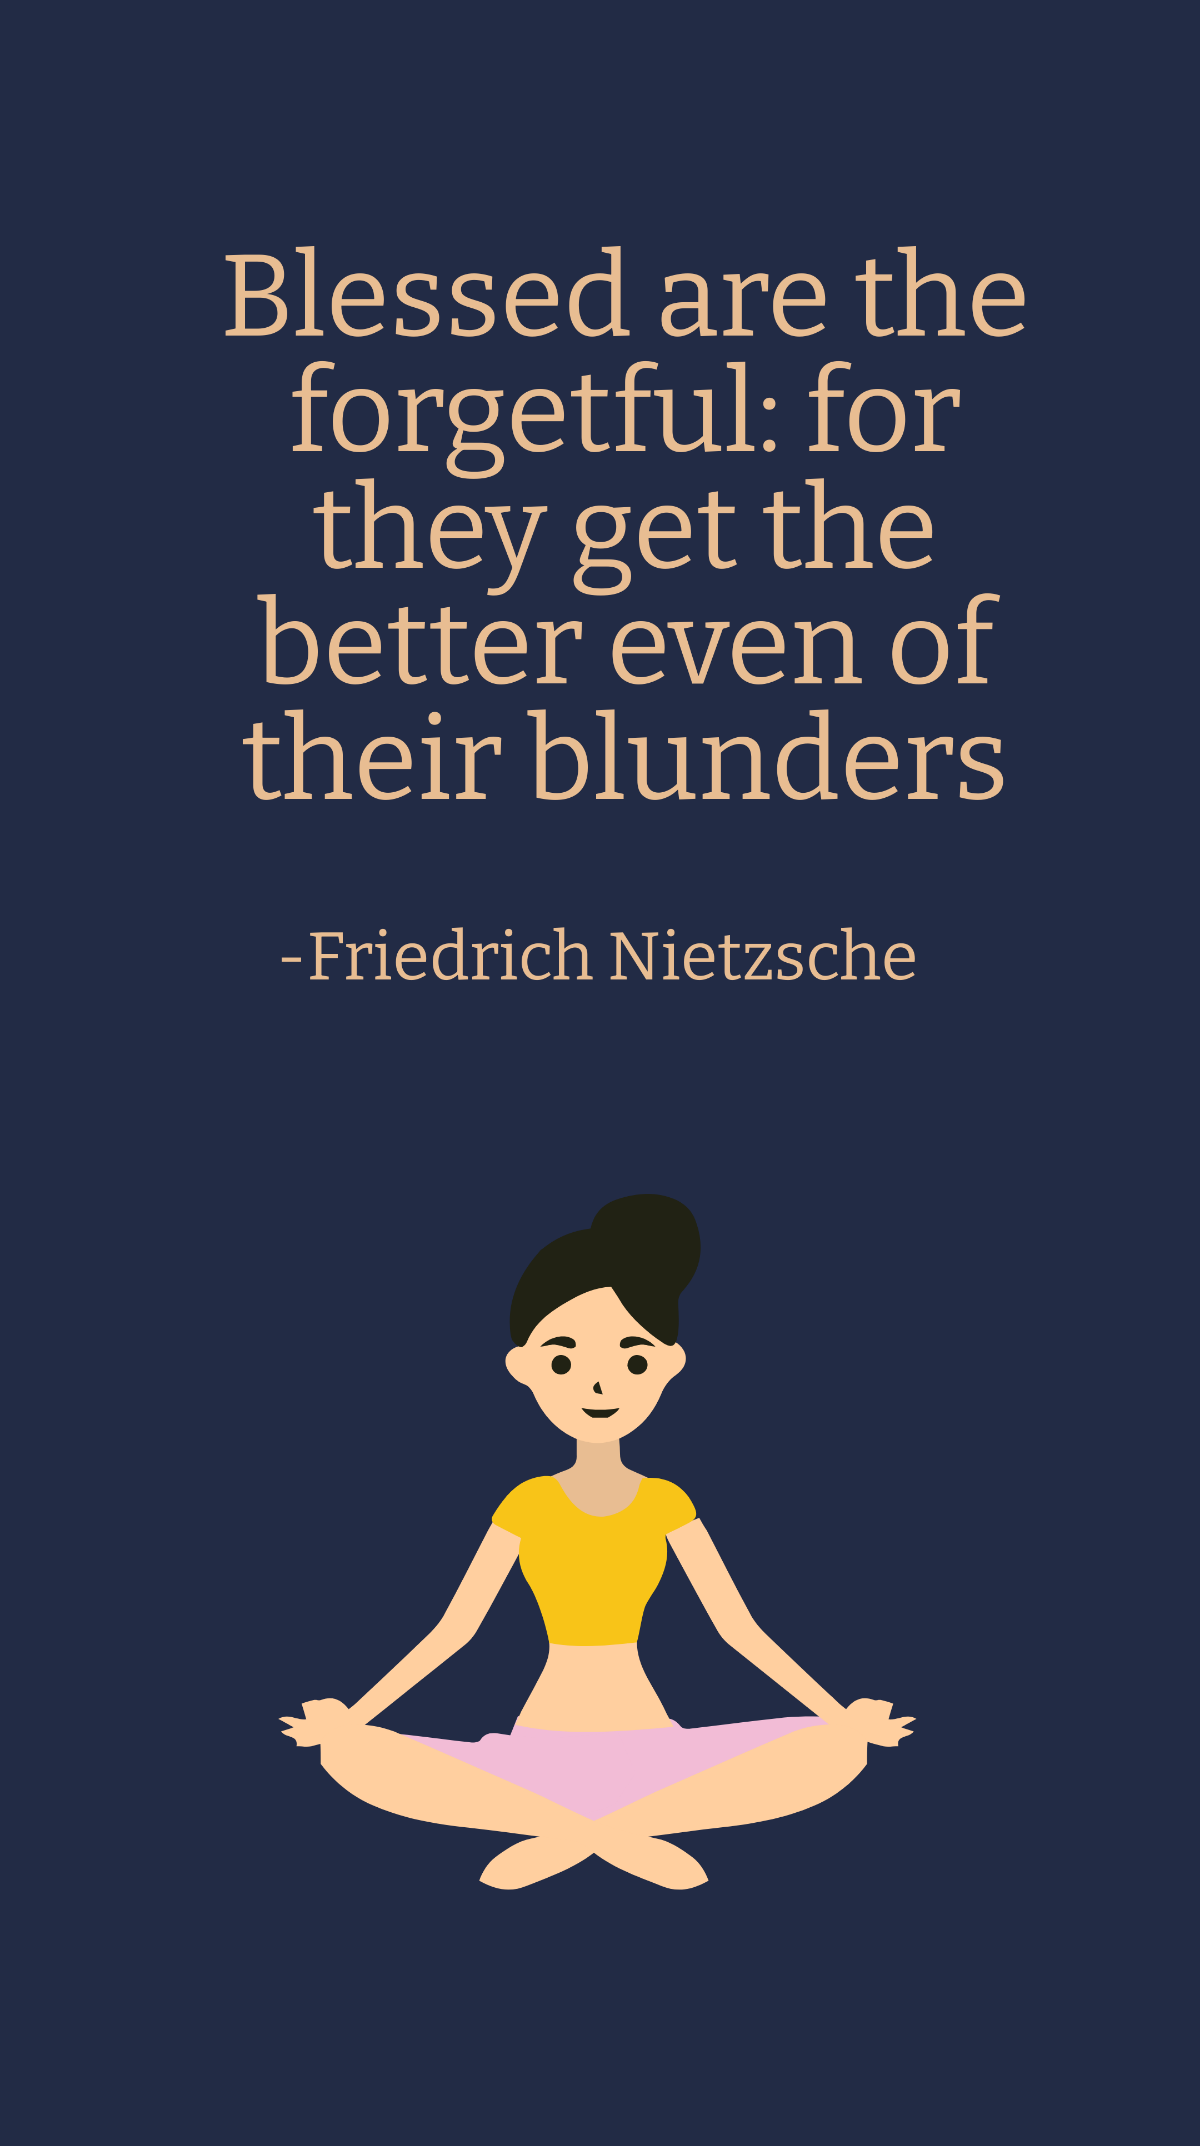 Free Friedrich Nietzsche - Blessed are the forgetful: for they get the better even of their blunders Template